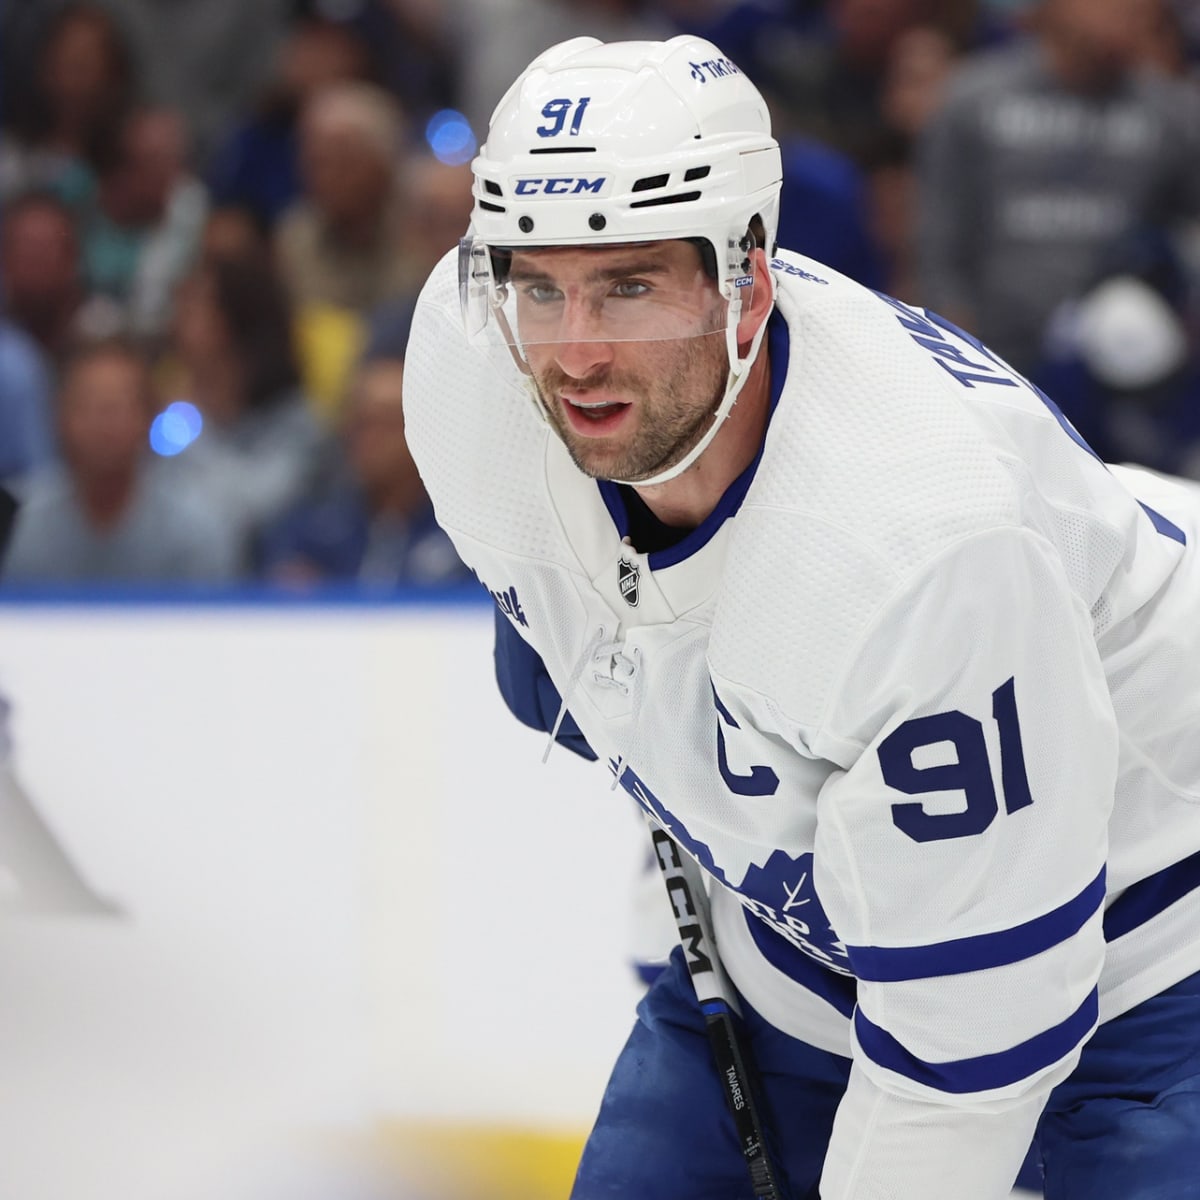 Toronto Maple Leafs: John Tavares Injured, Out for 3 Weeks